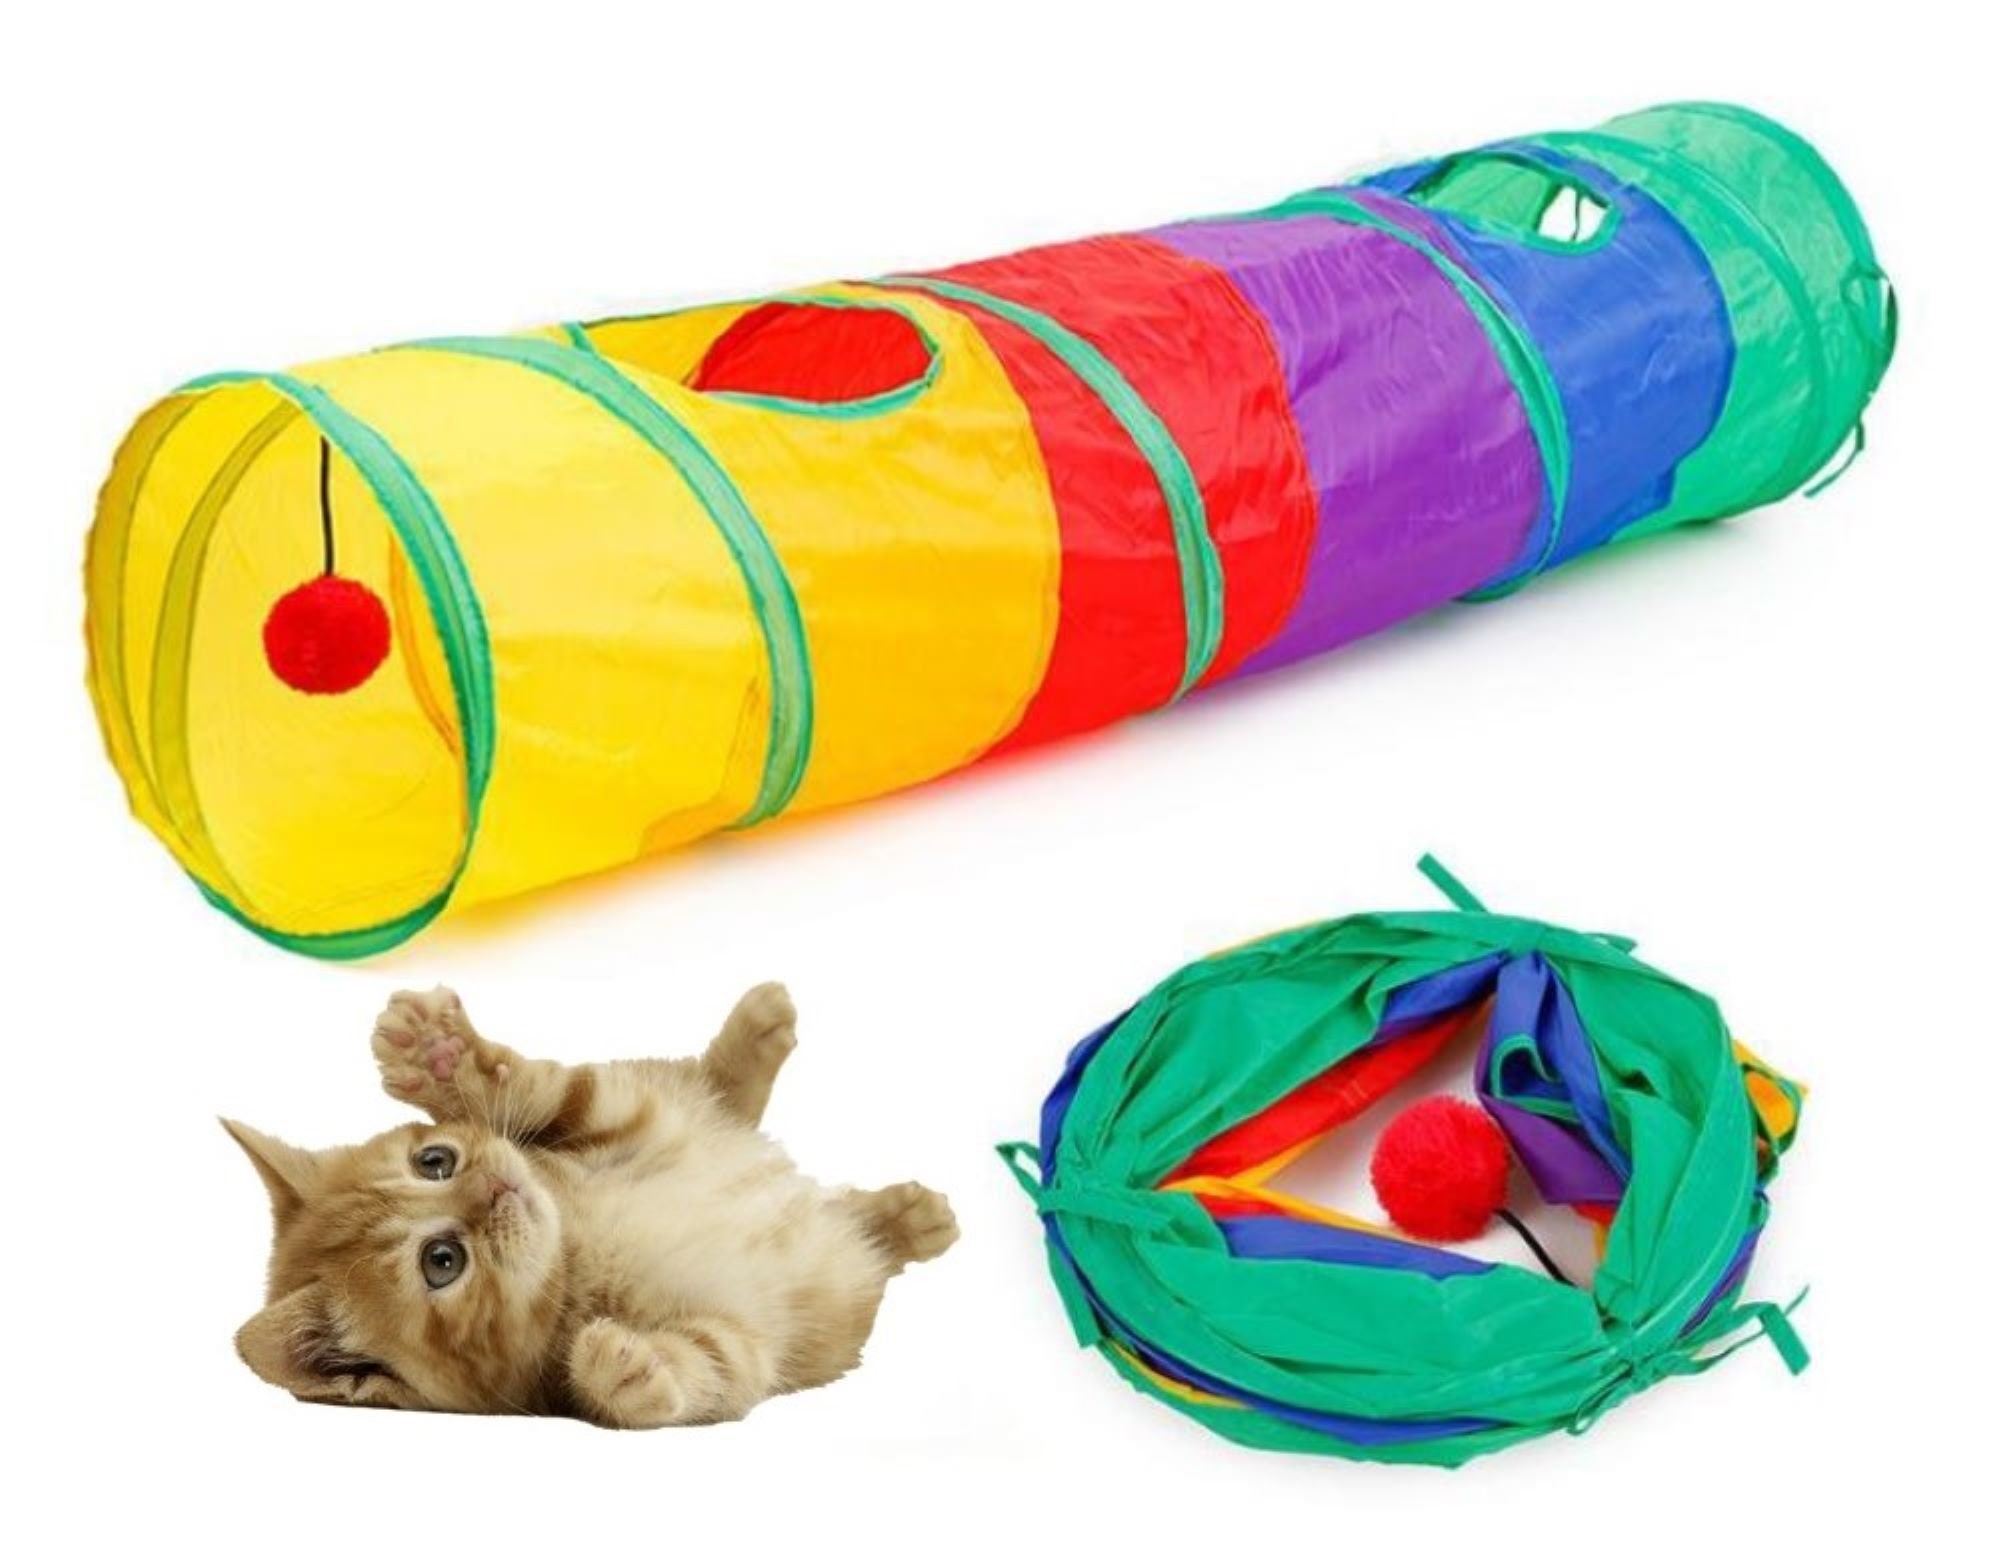 4 Feet Long Shop4Omni Kitty Cat Play Tunnel Pet Toy Four Exit Holes 